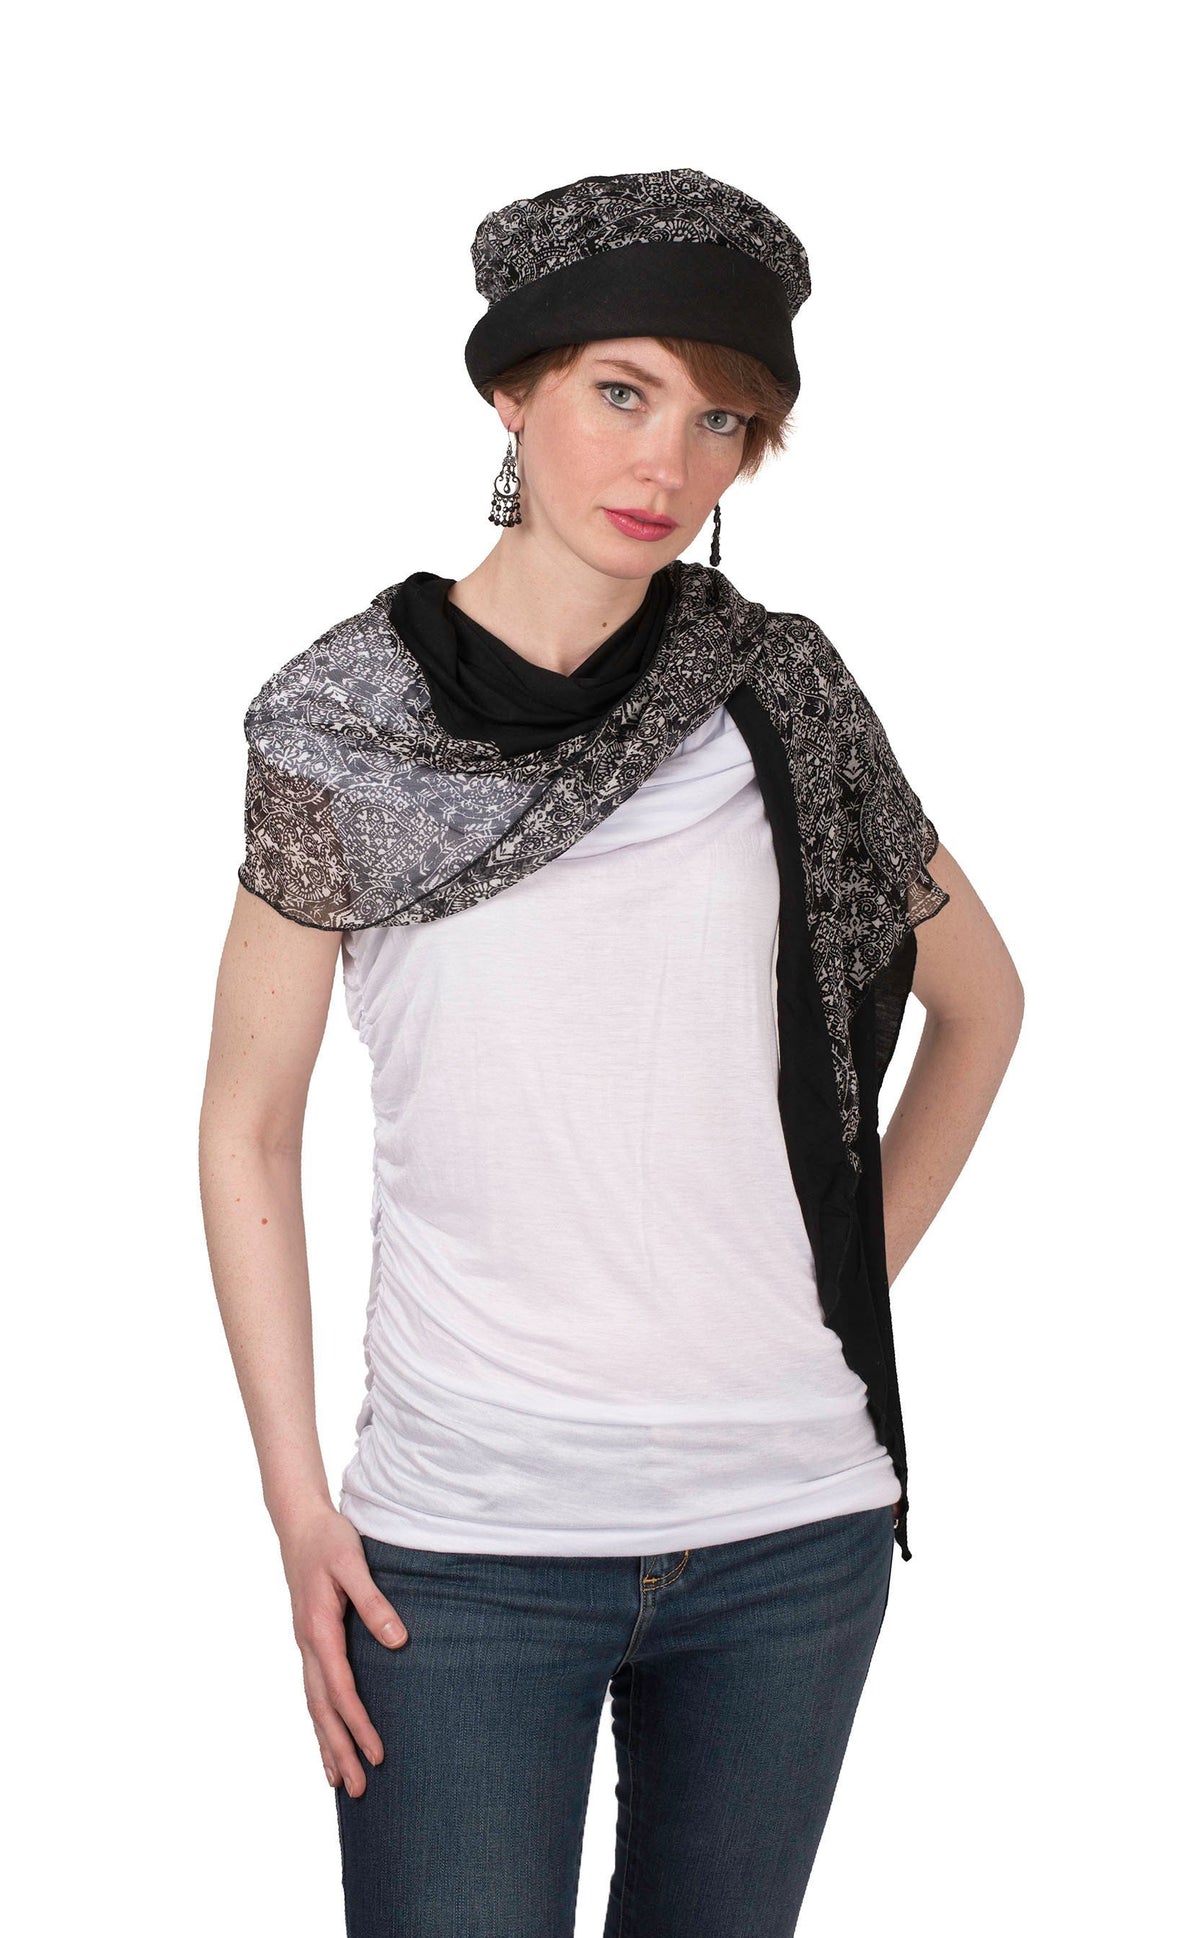 Handkerchief Scarf - Black &amp; White Paisley with Abyss Jersey Knit